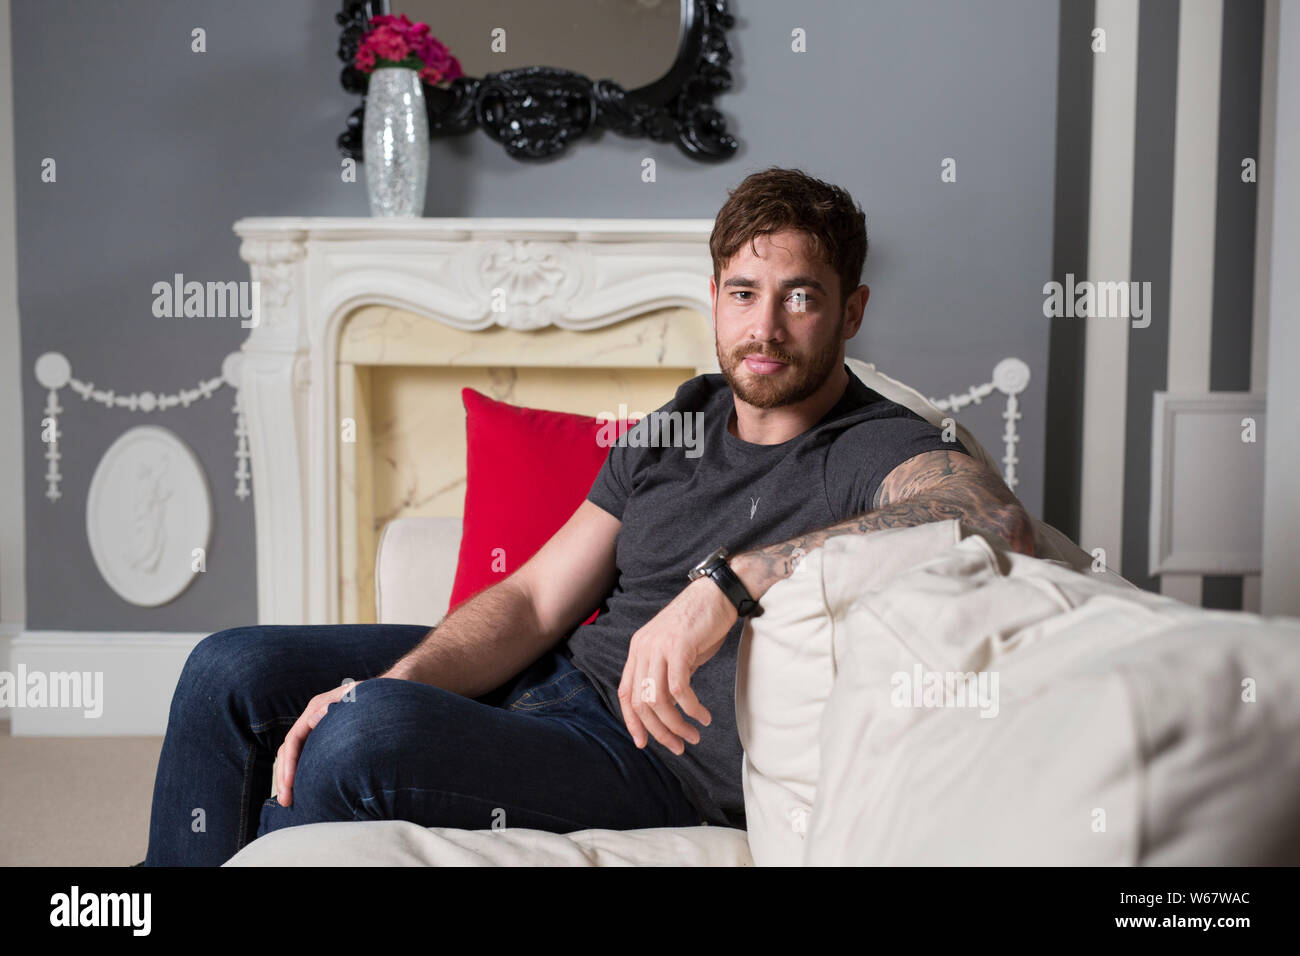 Rugby Spieler Danny Cipriani. Stockfoto